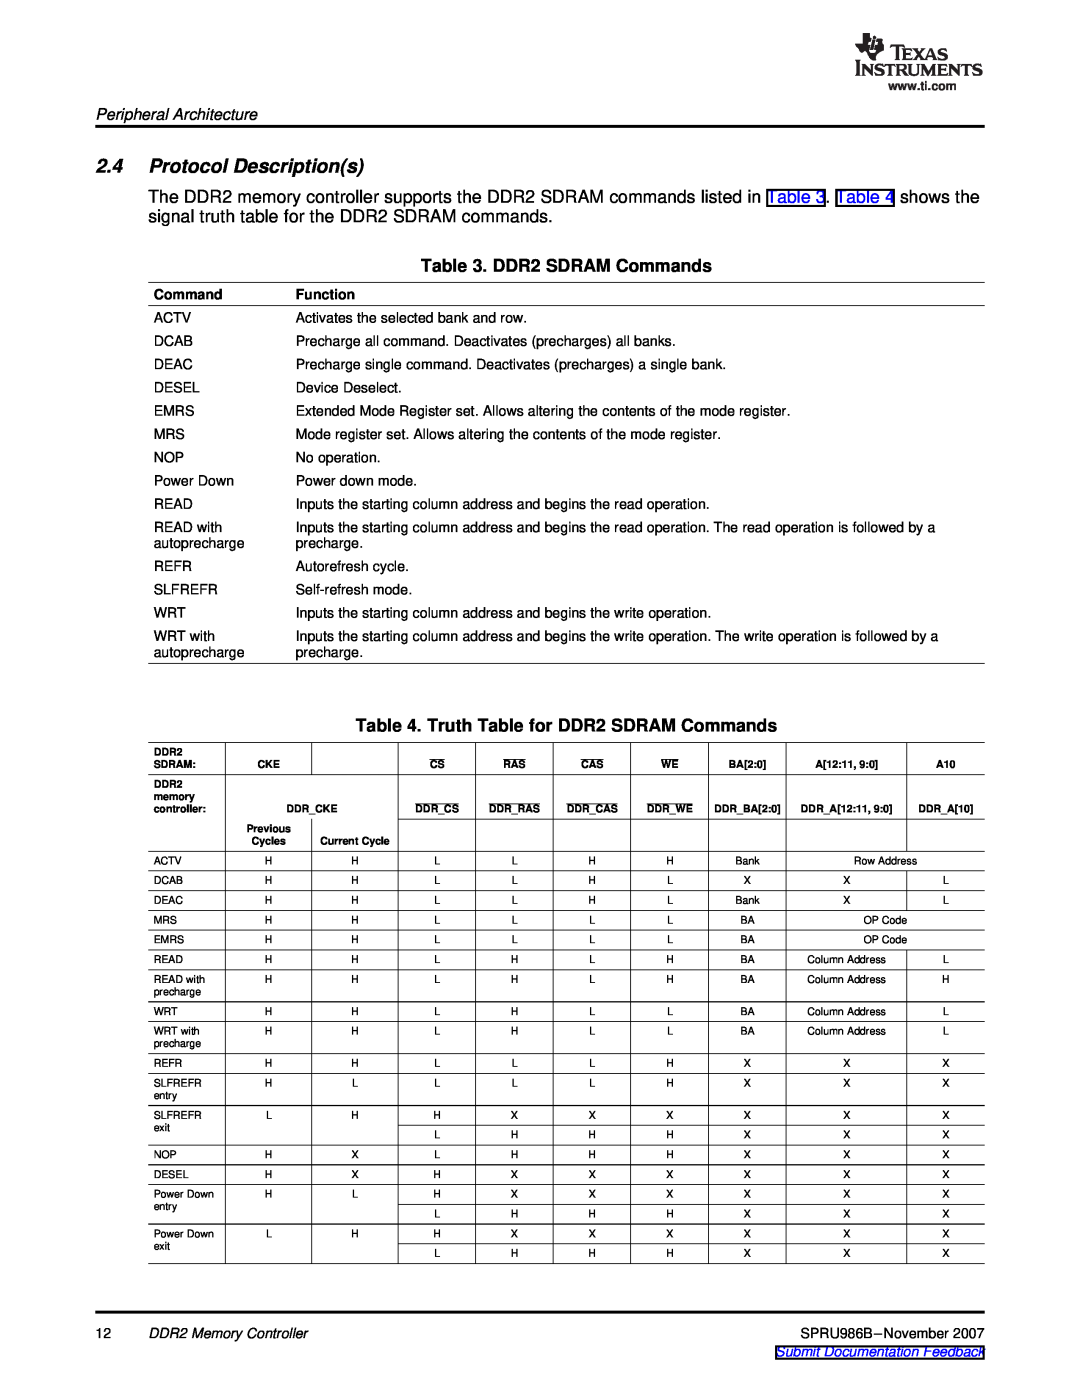 Texas Instruments TMS320DM643 Protocol Descriptions, Truth Table for DDR2 SDRAM Commands, Peripheral Architecture 